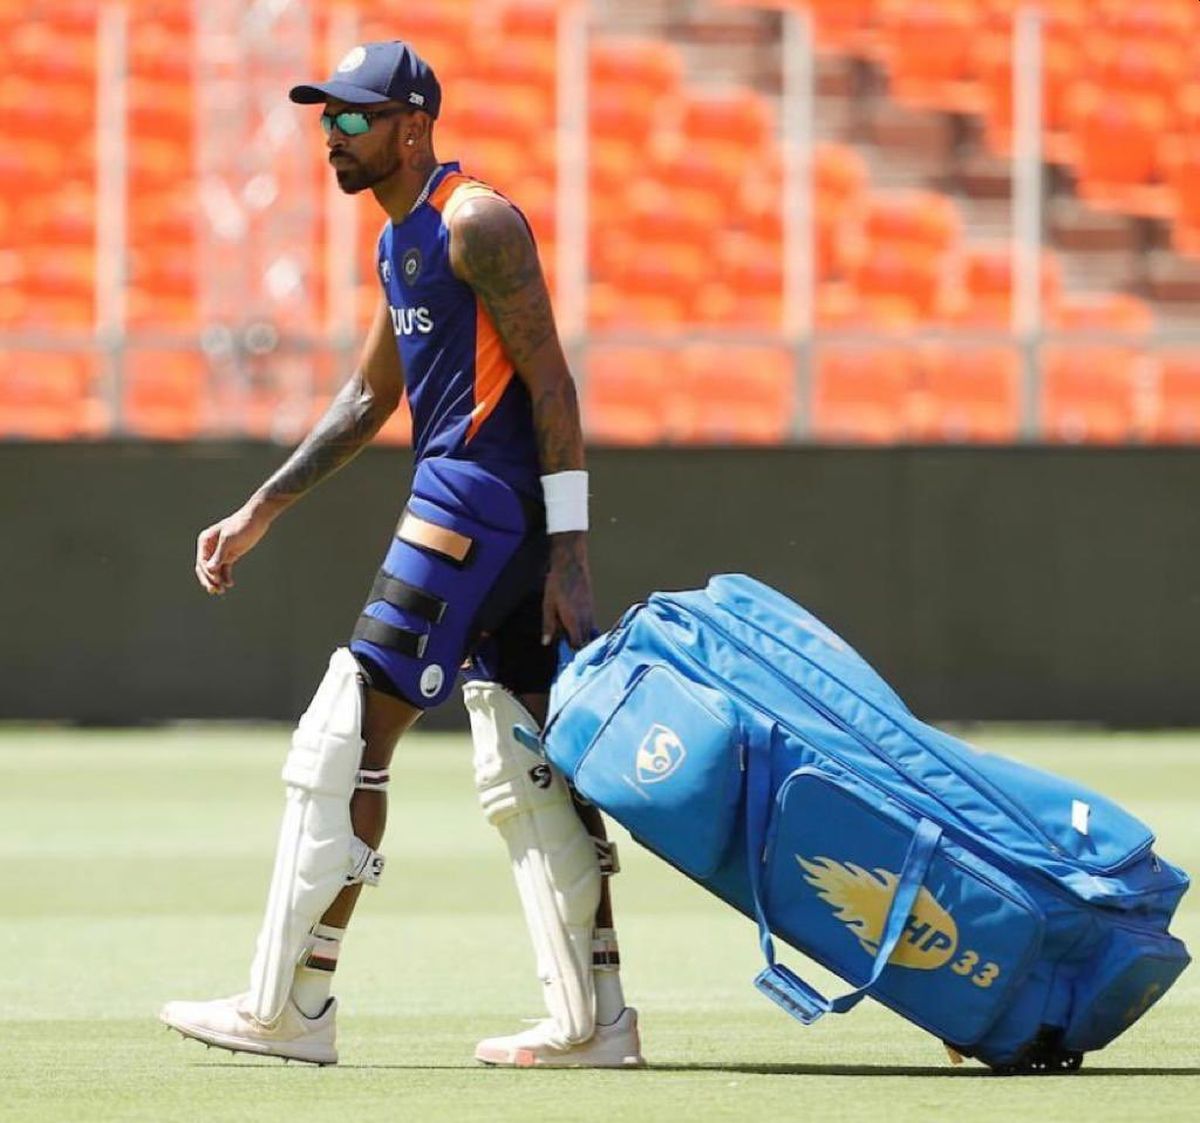 Hardik Pandya was with the Test team during the recent England series and Rohit Sharma feels that helped him get ready for his responsibilities in white-ball cricket.